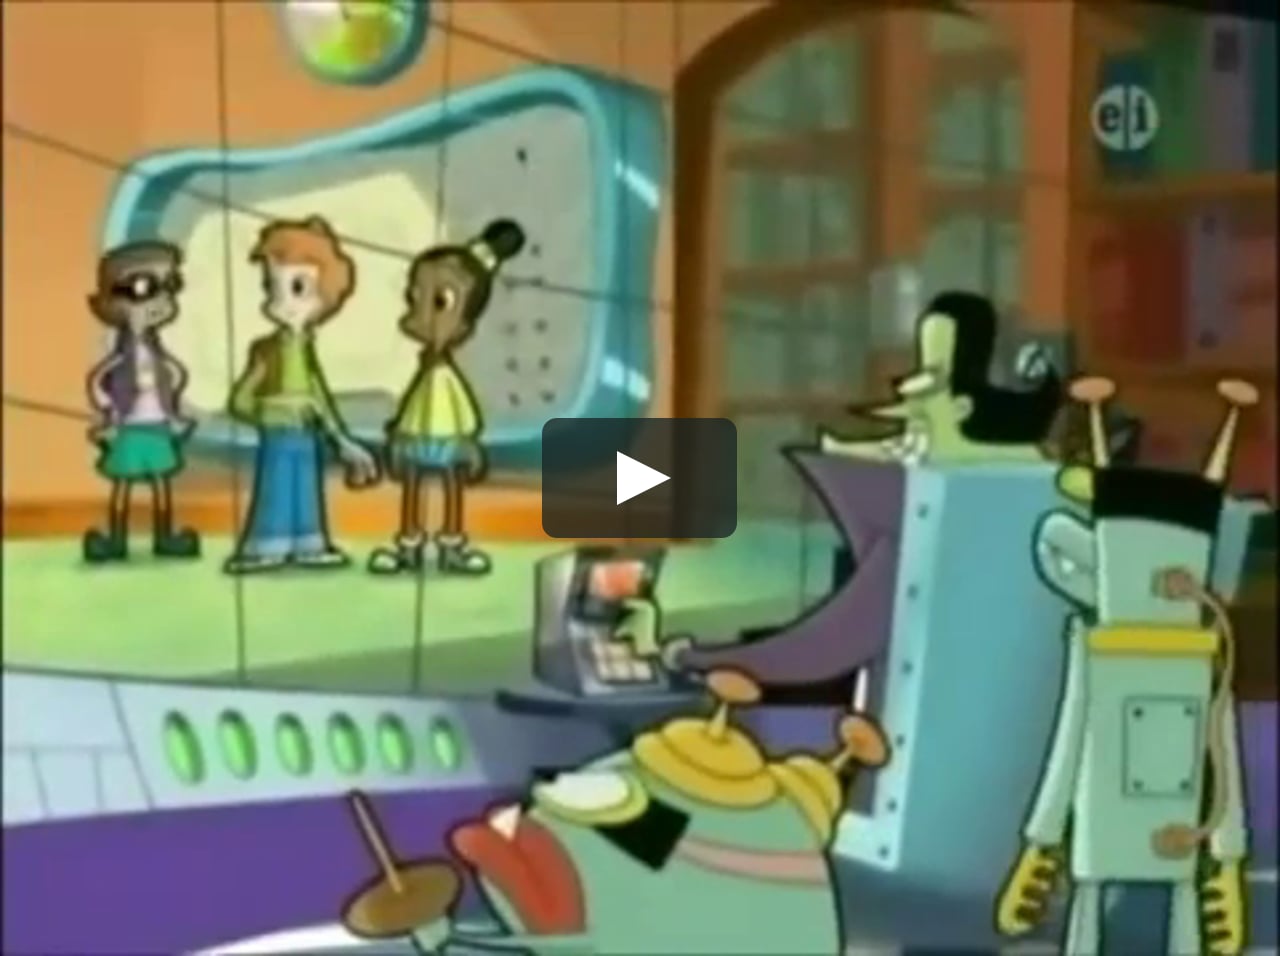 Cyberchase S1 Ep1 Lost My Marbles On Vimeo 4312